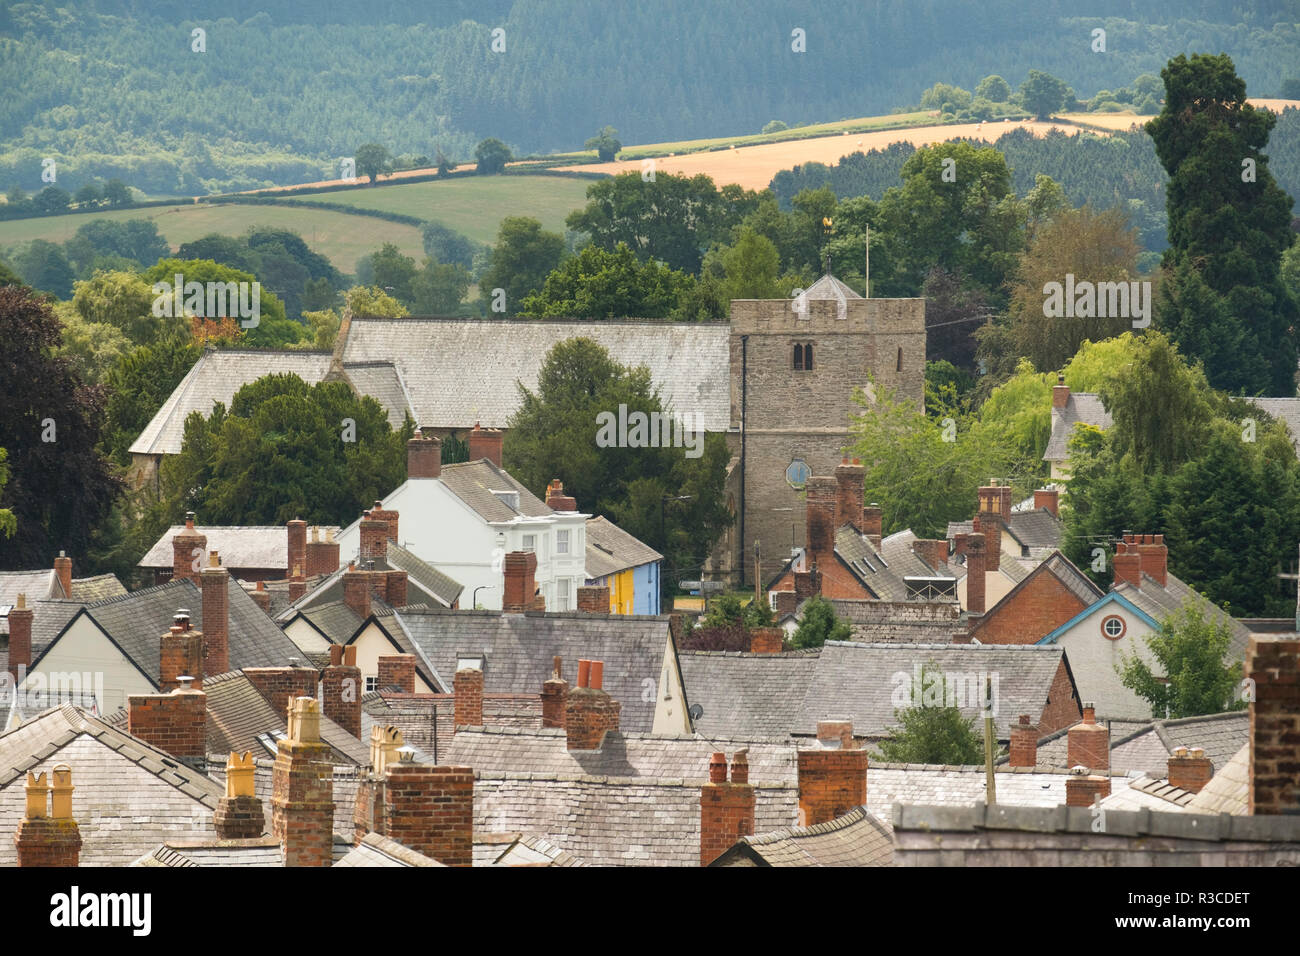 St John the Baptist parish church over the rooftops at Bishop's Castle, Shropshire, England, UK Stock Photo